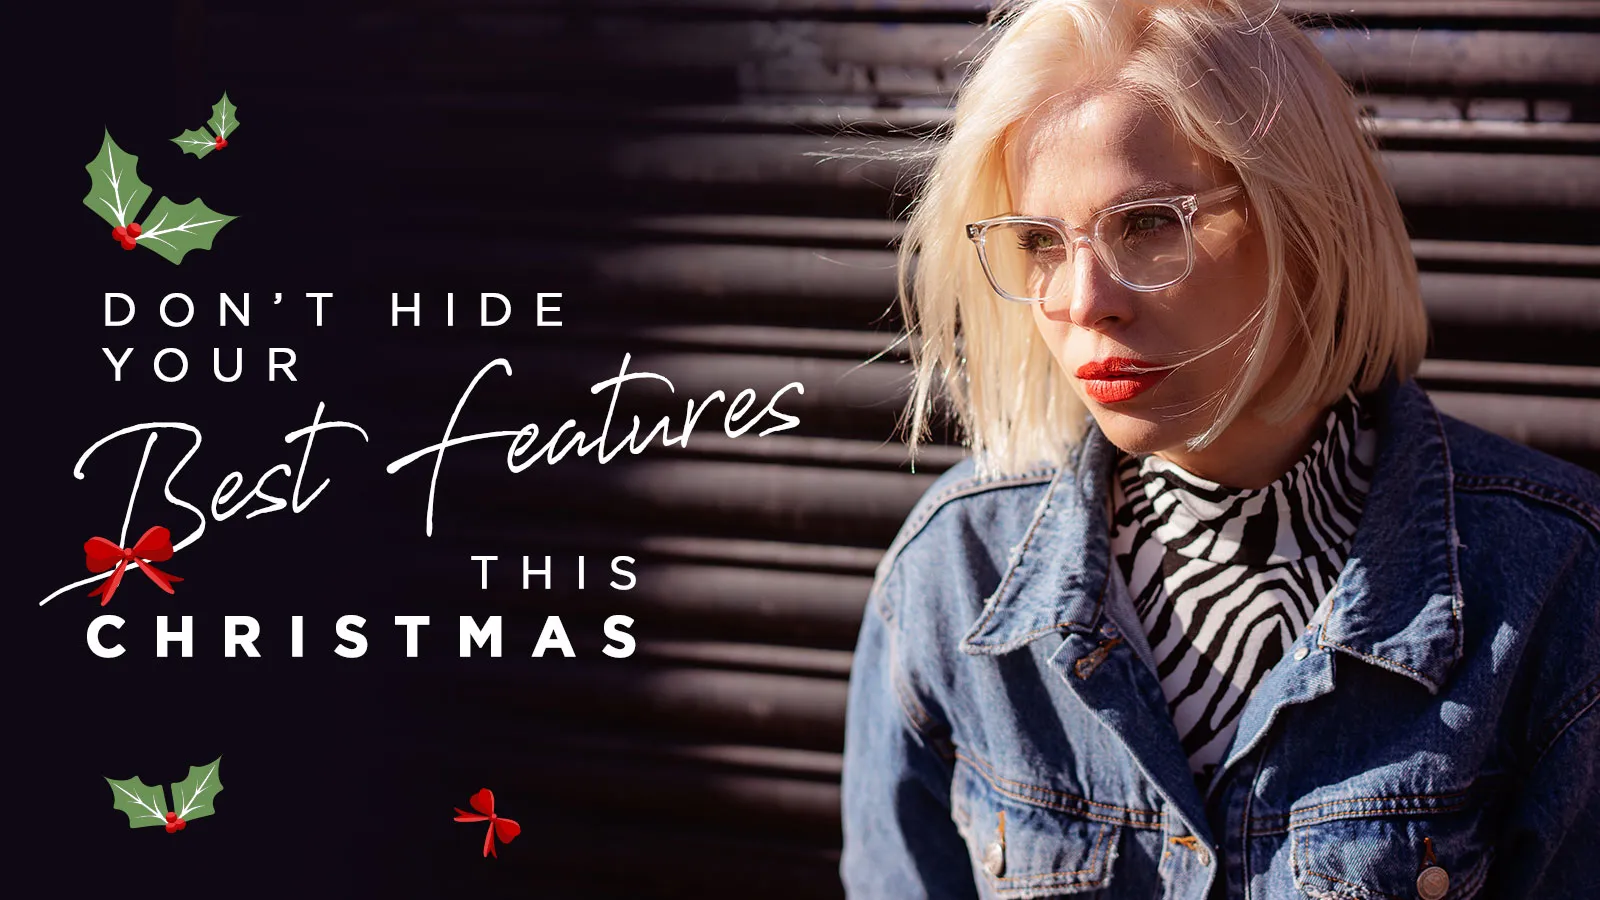 Don't Hide Your Best Features This Christmas